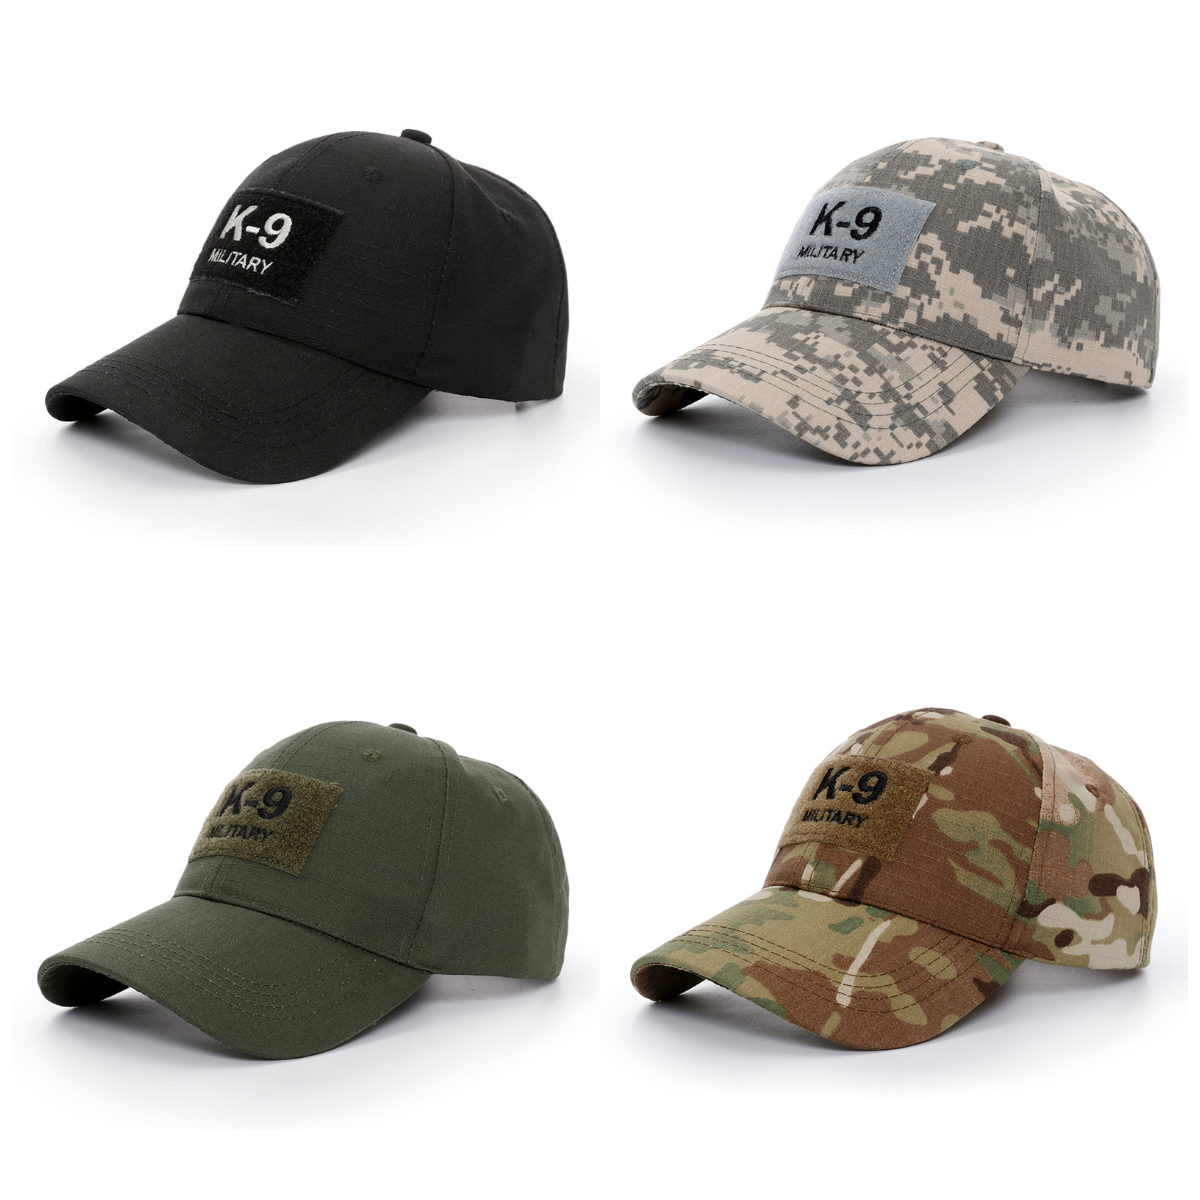 Camouflage Tactical Baseball Cap K9 Embroidered Cap - CJdropshipping